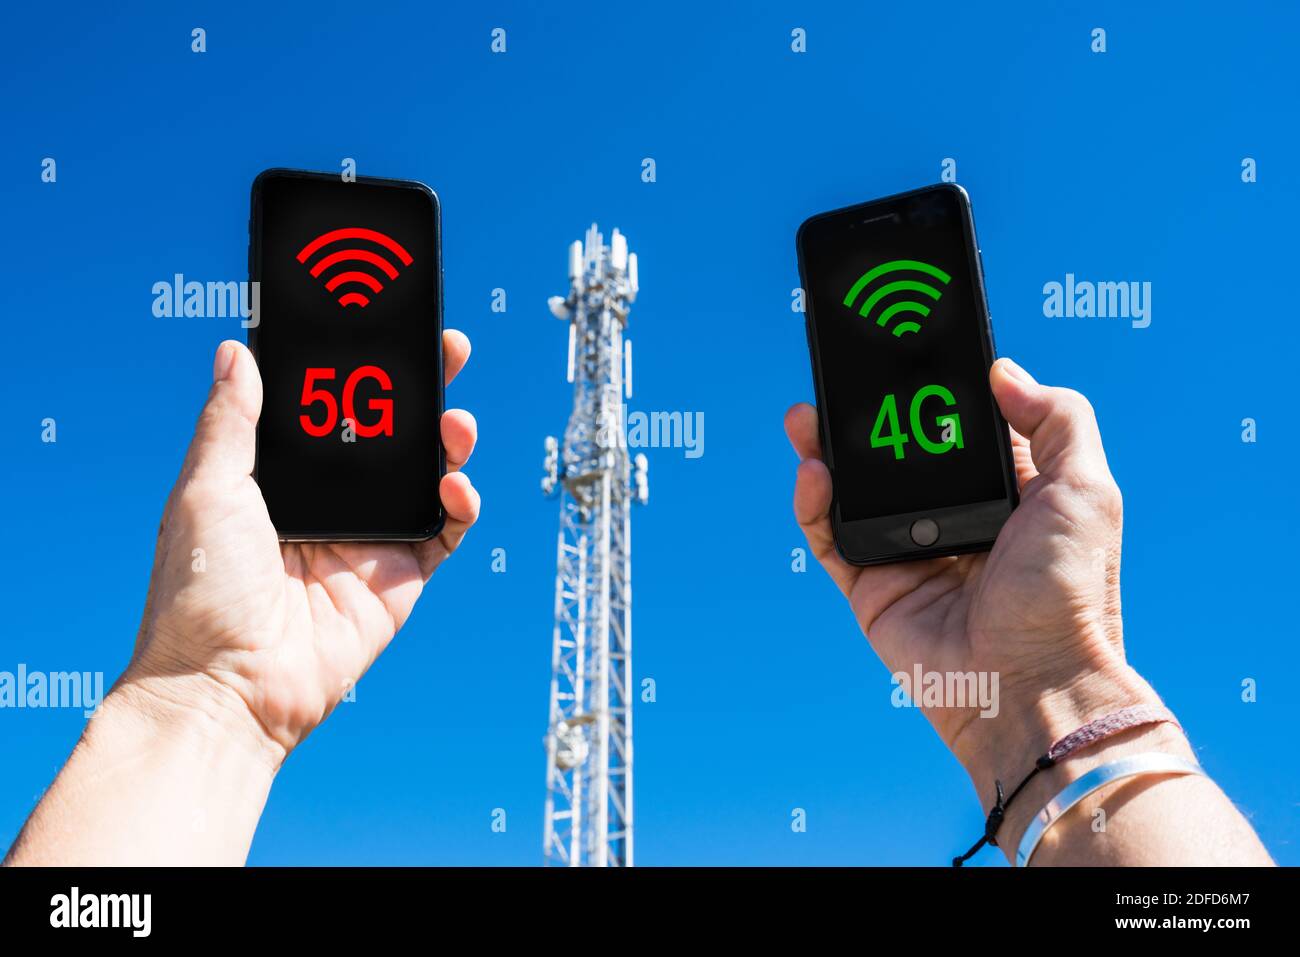 Cellular telephony relay antenna and comparison between 4G and 5G networks. Stock Photo